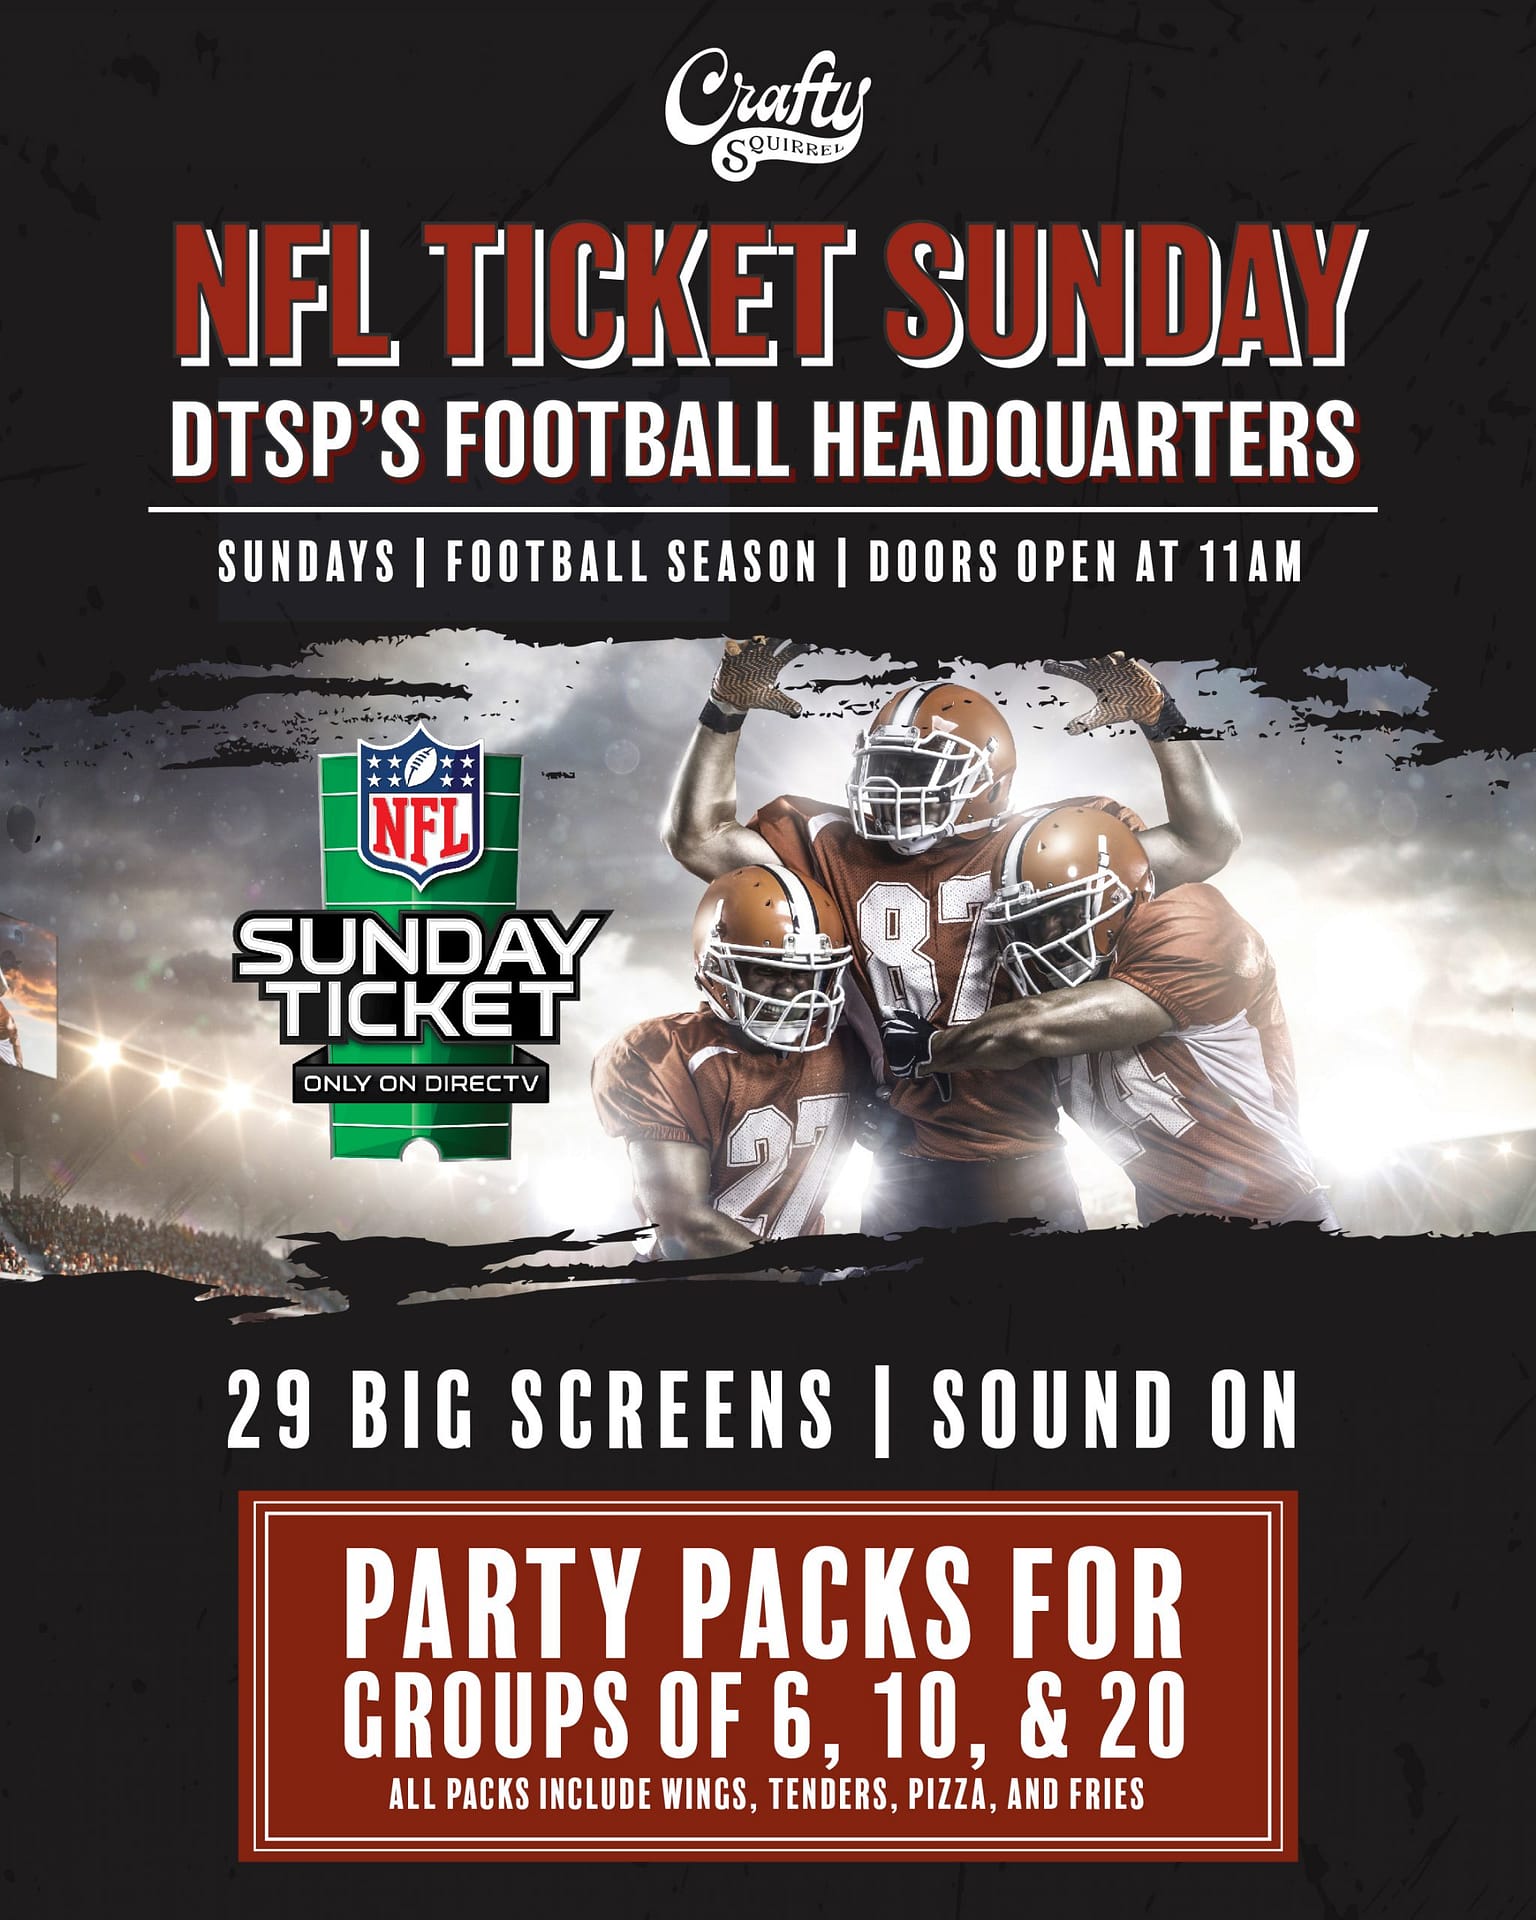 NFL Ticket Sunday at the Crafty Squirrel in Downtown St. Petersburg is DTSP's Football headquarters.